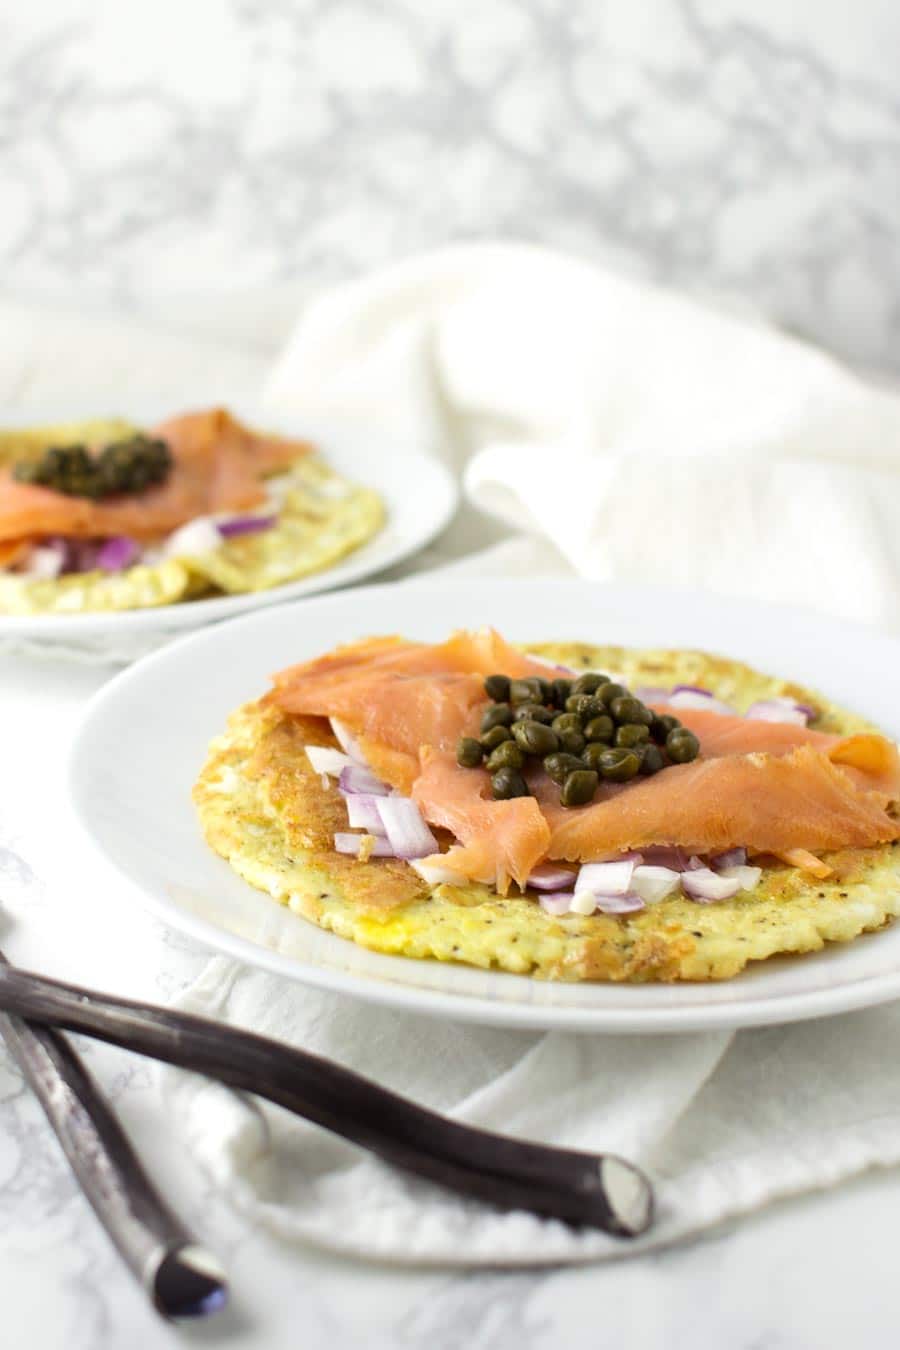 Smoked Salmon Omelet recipe from acleanplate.com #paleo #healthy #recipe